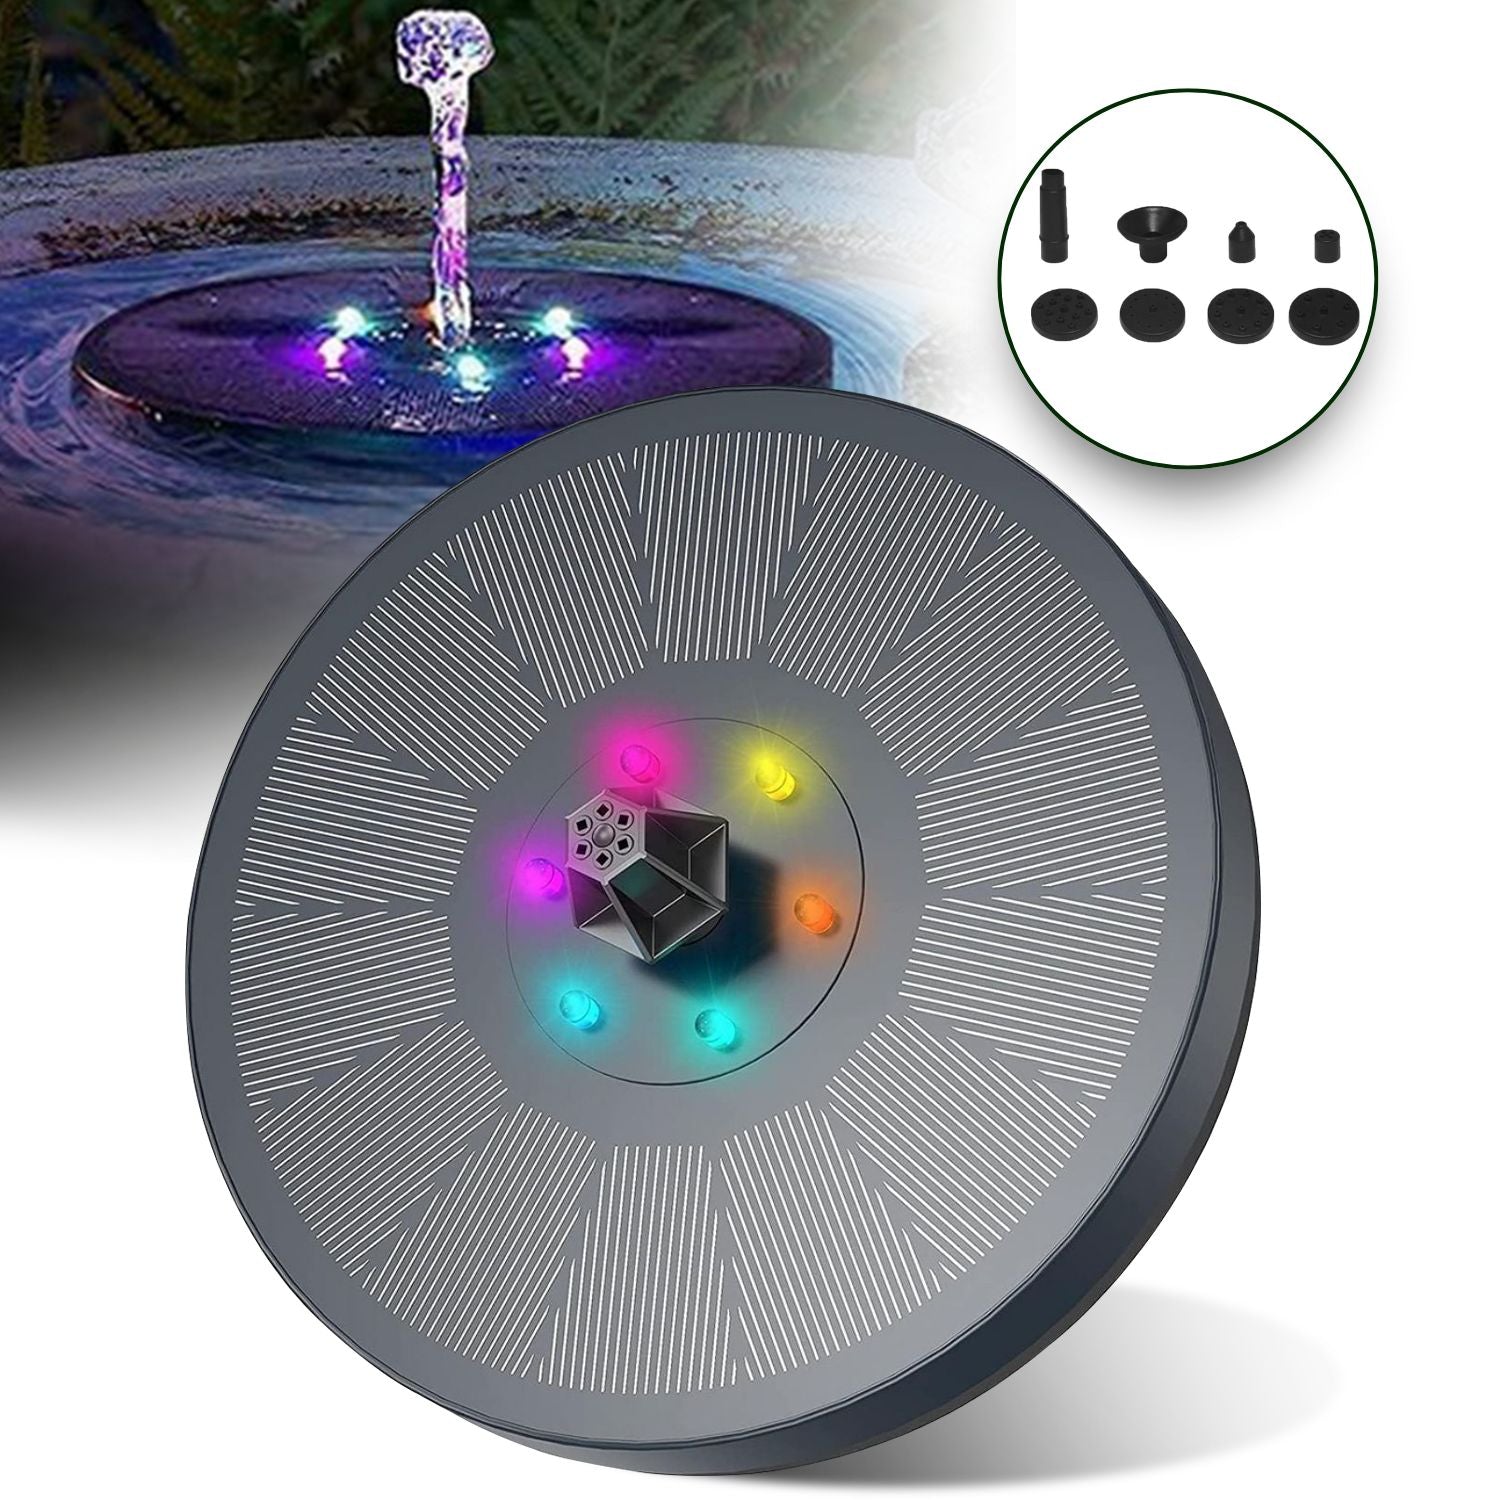 NOVEDEN Solar Fountain Water Pump for Bird Bath with RGB Color LED Lights (Black)